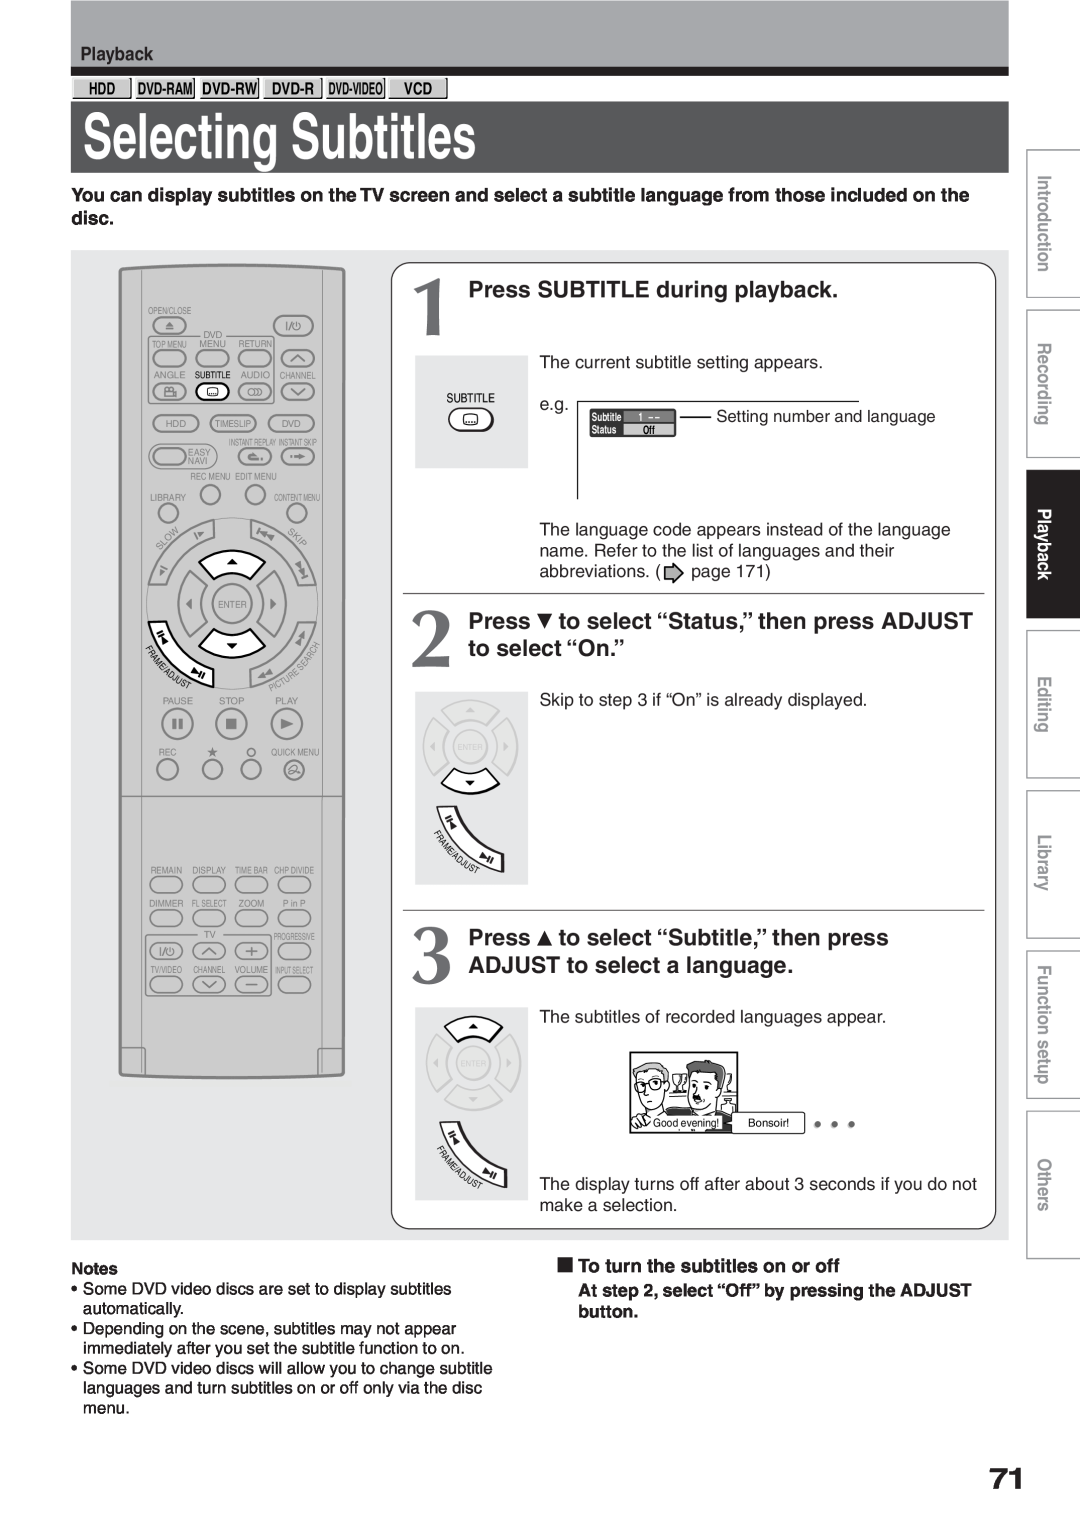 Toshiba RD-XS32SU Selecting Subtitles, Press SUBTITLE during playback, disc, To turn the subtitles on or off, Playback 